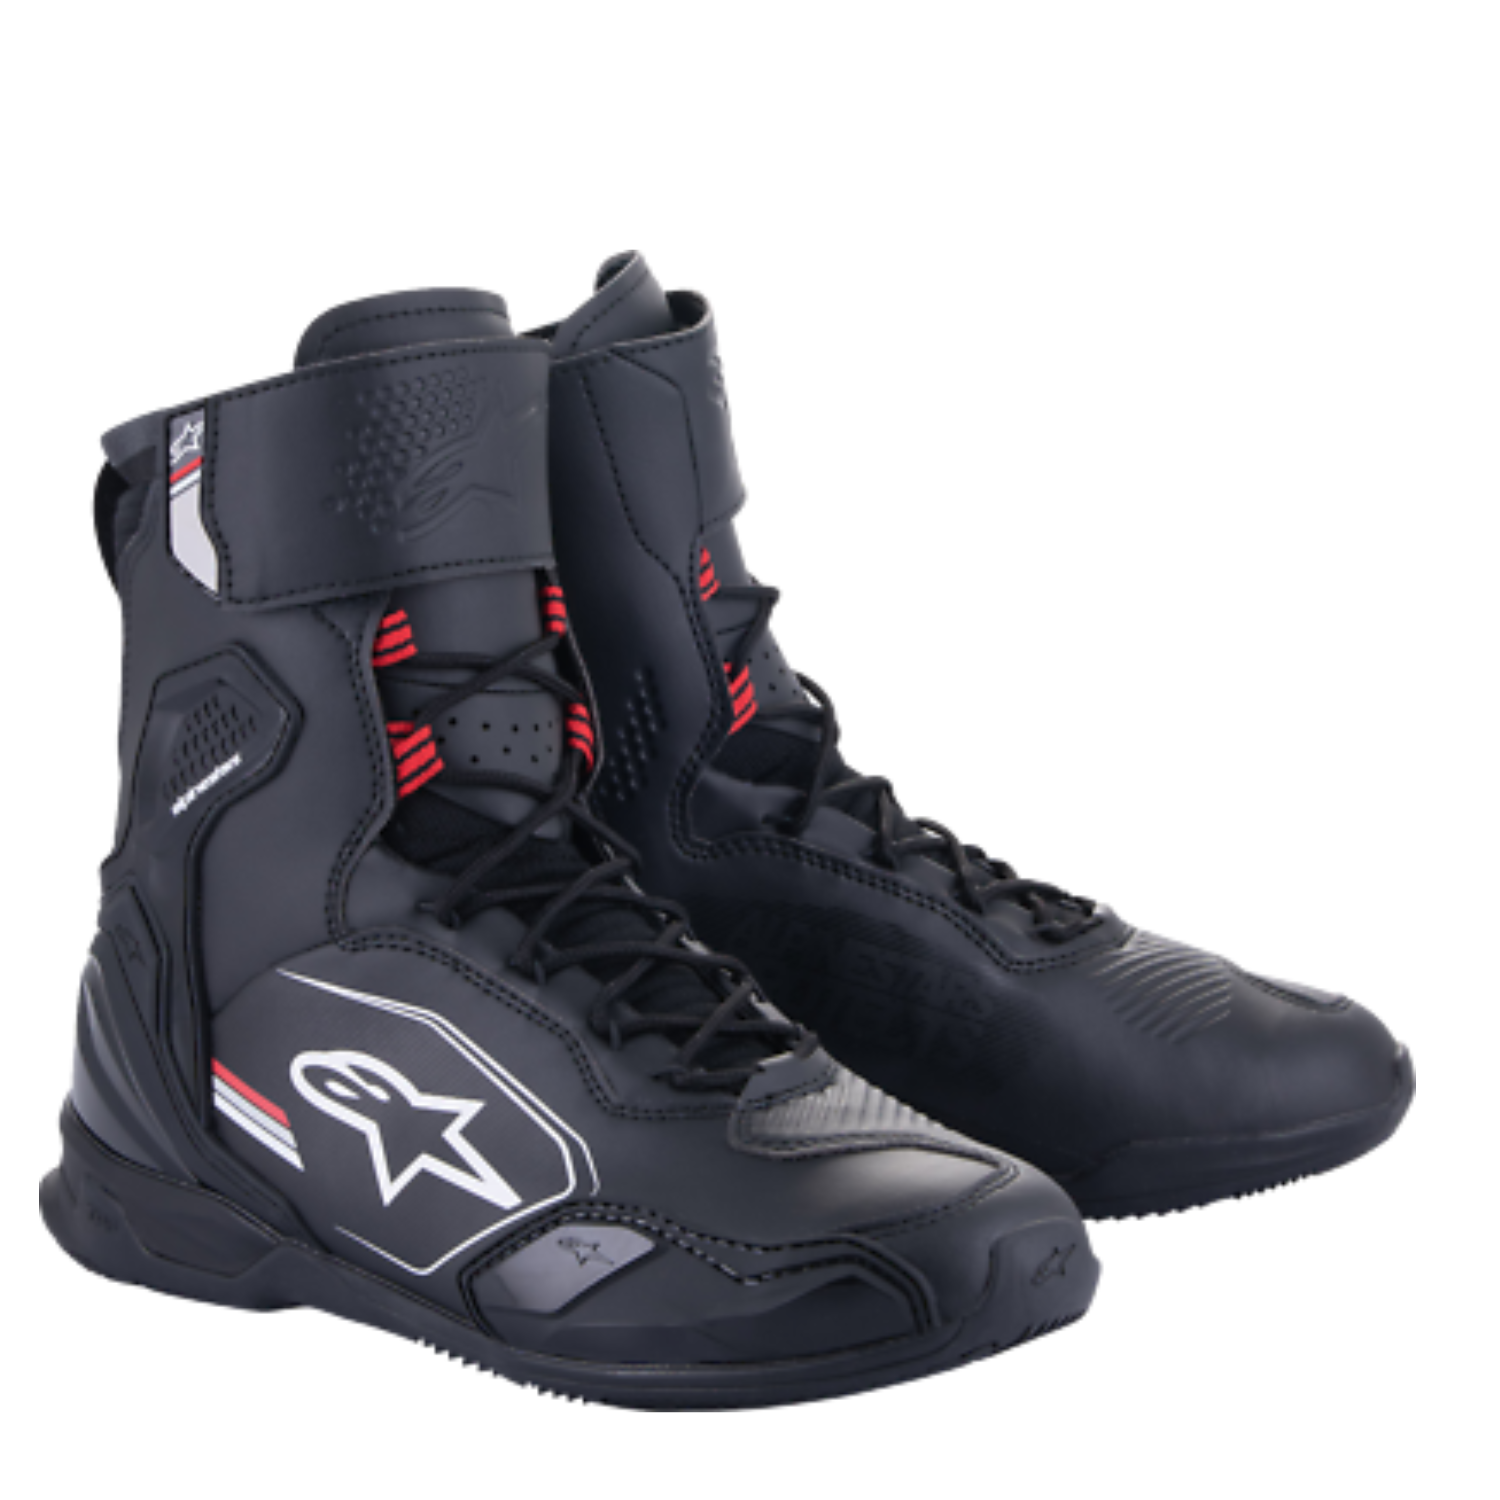 Image of Alpinestars Superfaster Shoes Black Gray Bright Red Taille US 65